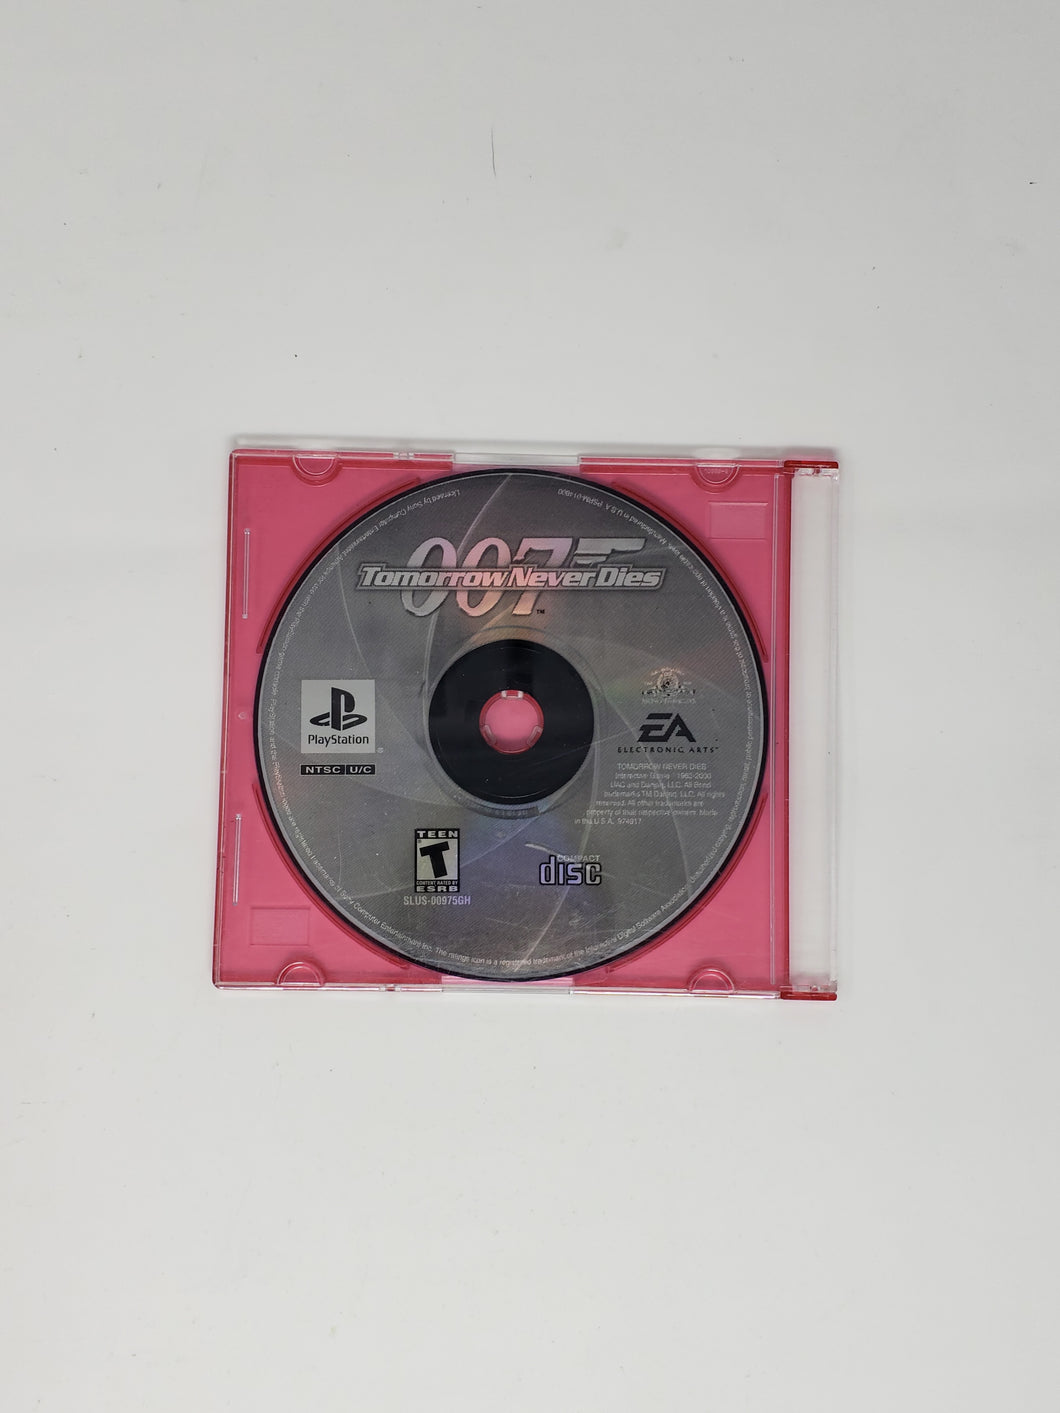 007 Tomorrow Never Dies [Greatest Hits] - Sony Playstation 1 | PS1